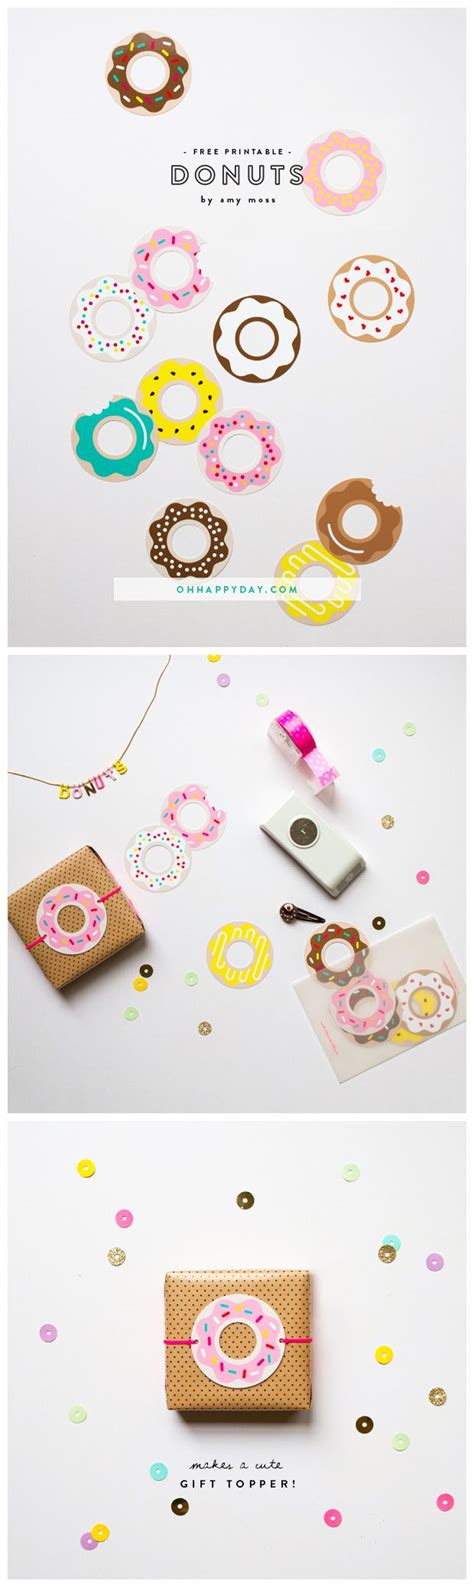 donut printables  amy moss   happy day donut party diy